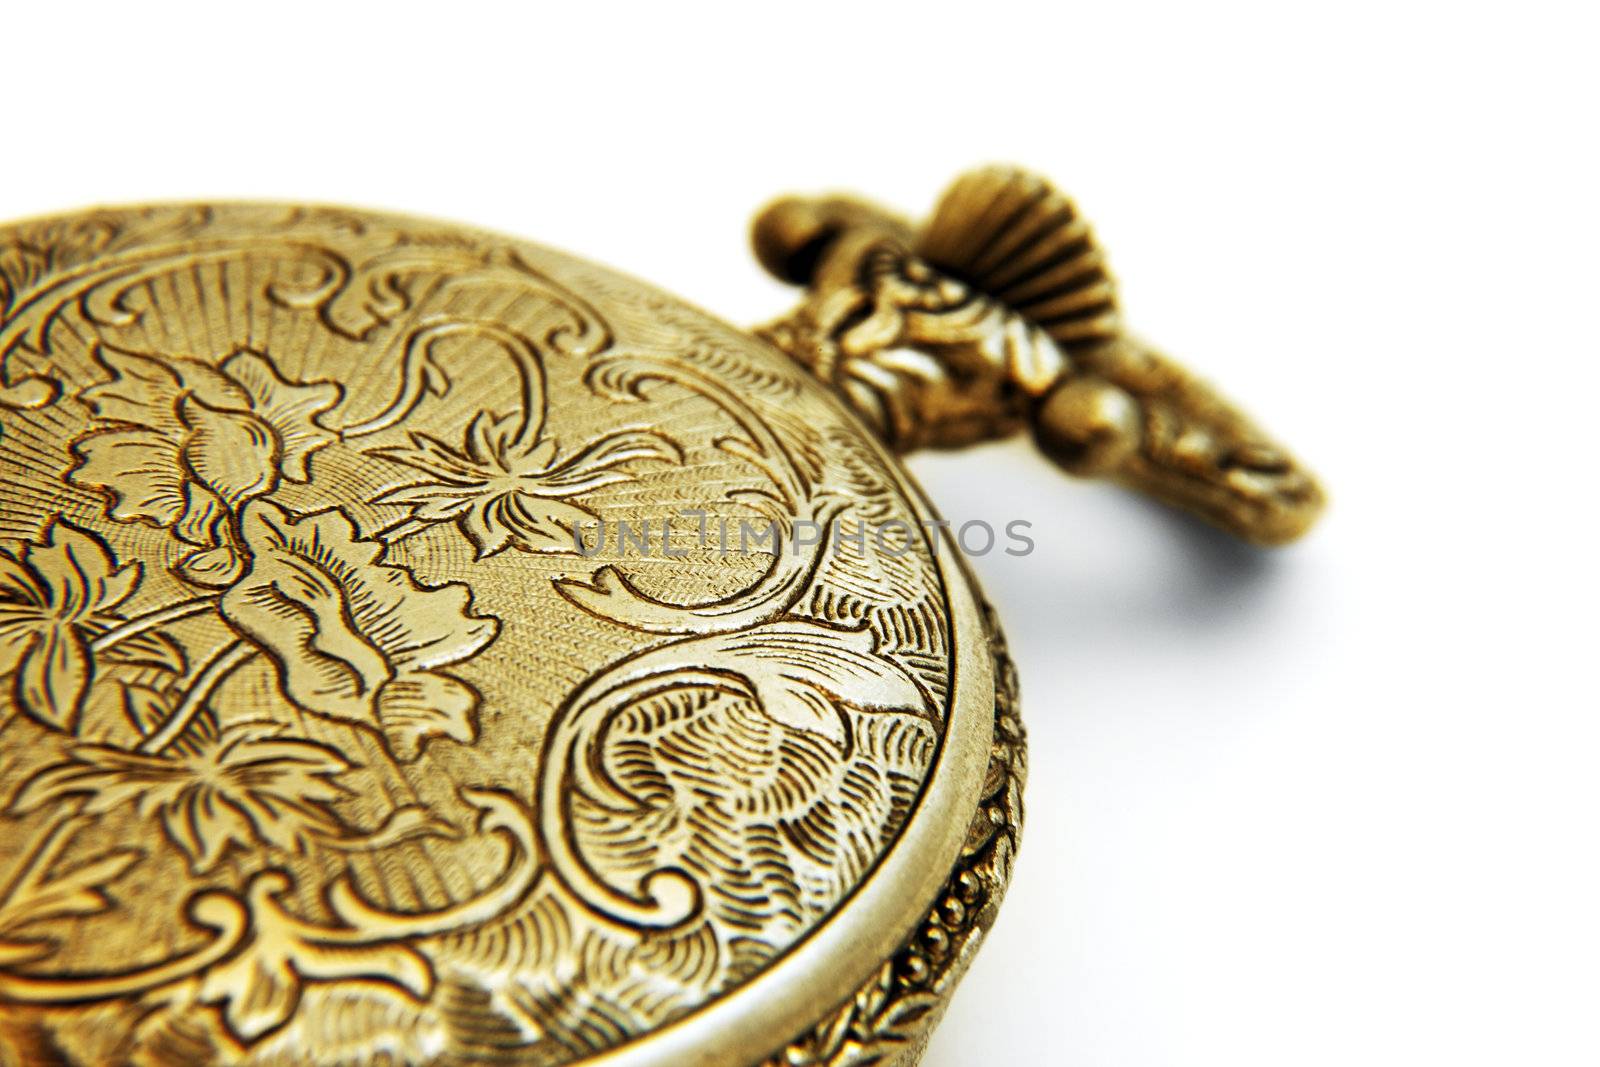 Macro shot of a closed gold pocket watch against white